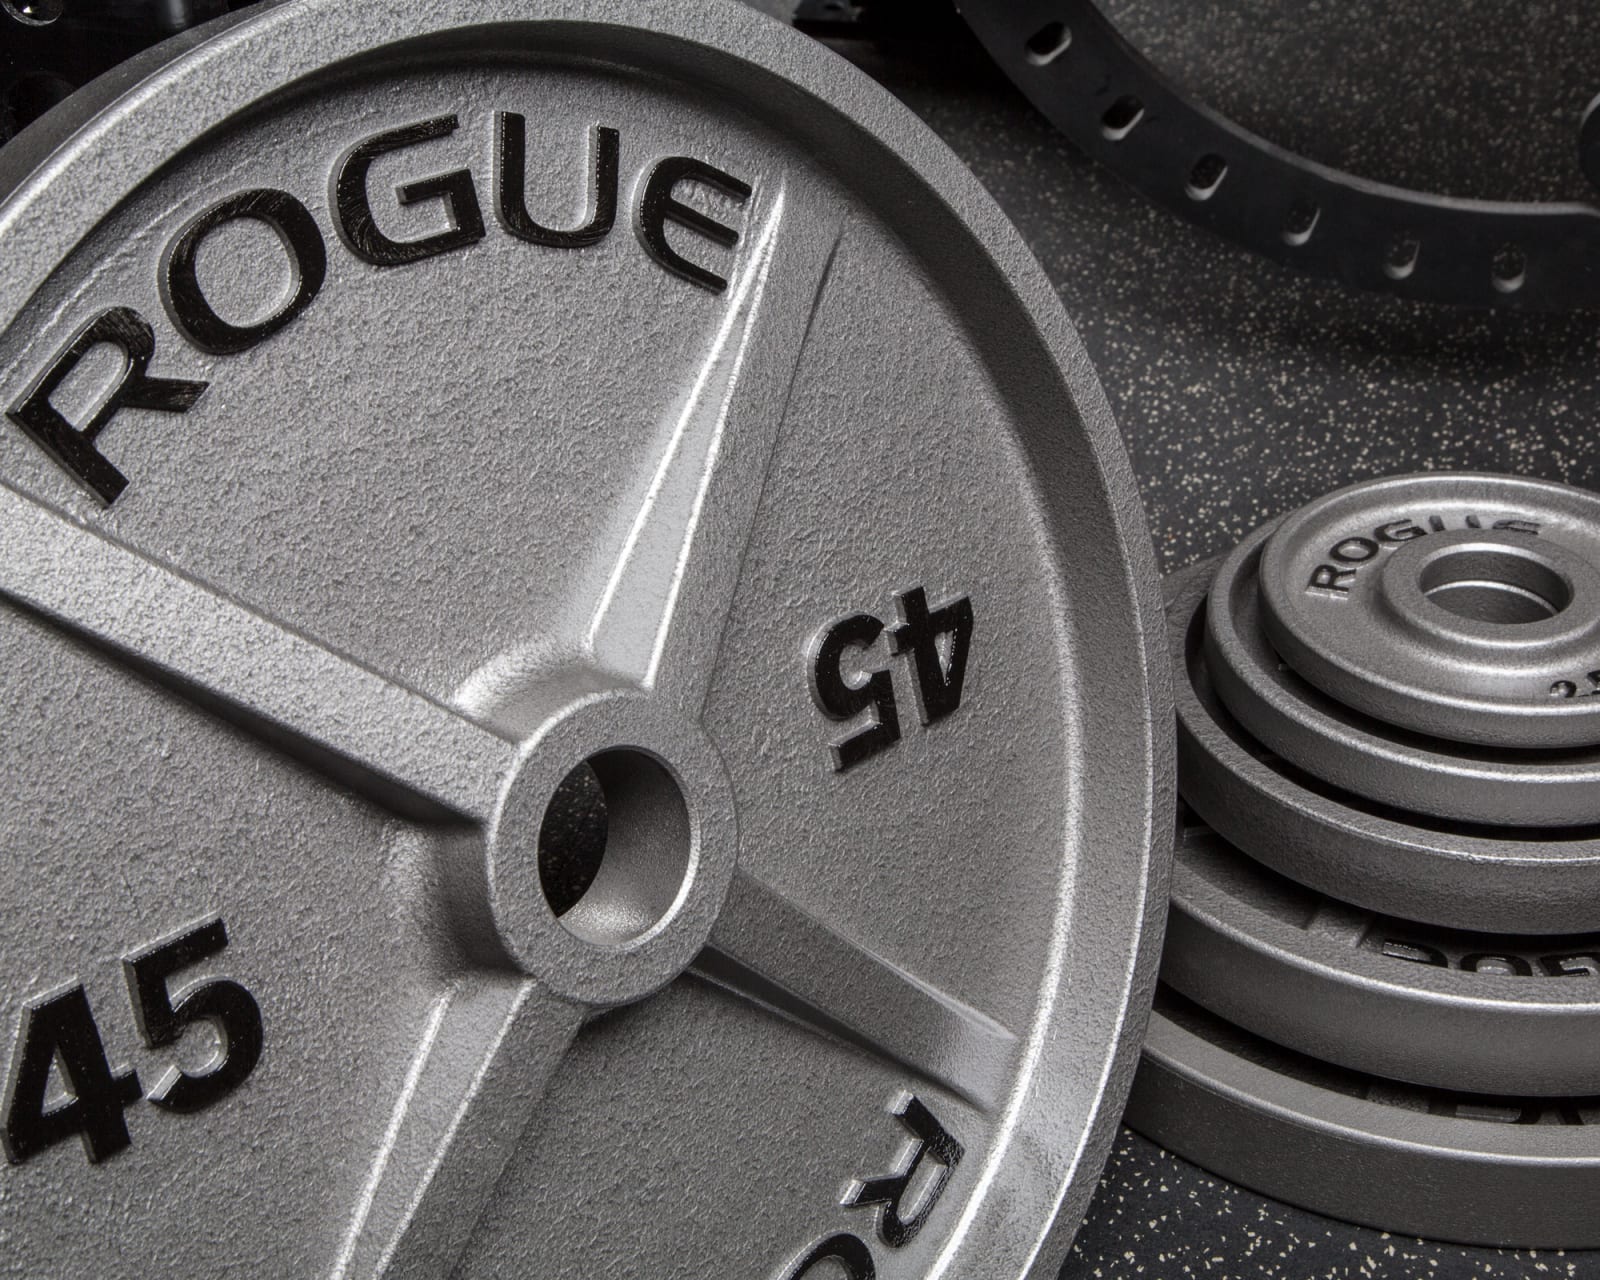 Rogue Machined Olympic Plates